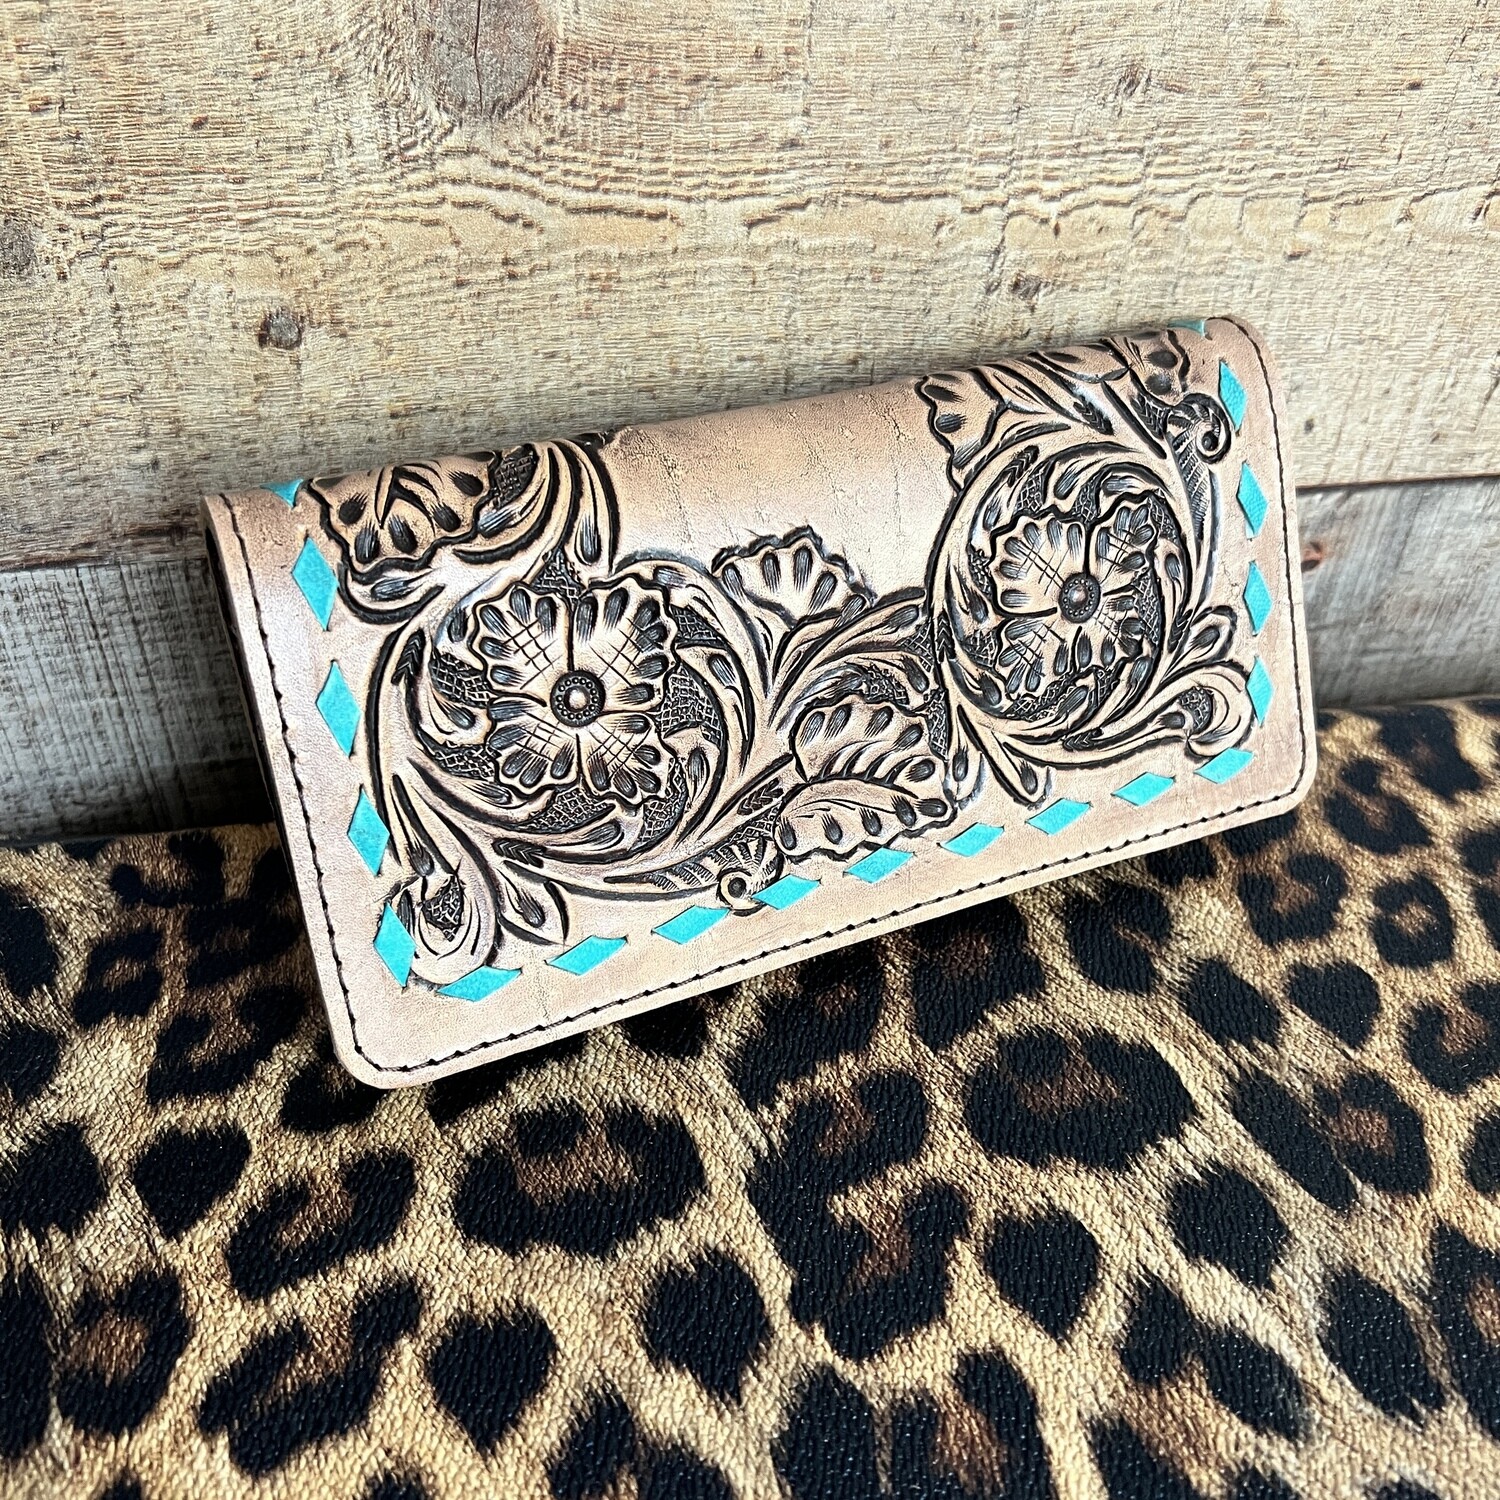 Tooled Leather Wallet Teal Stitching by American Darling